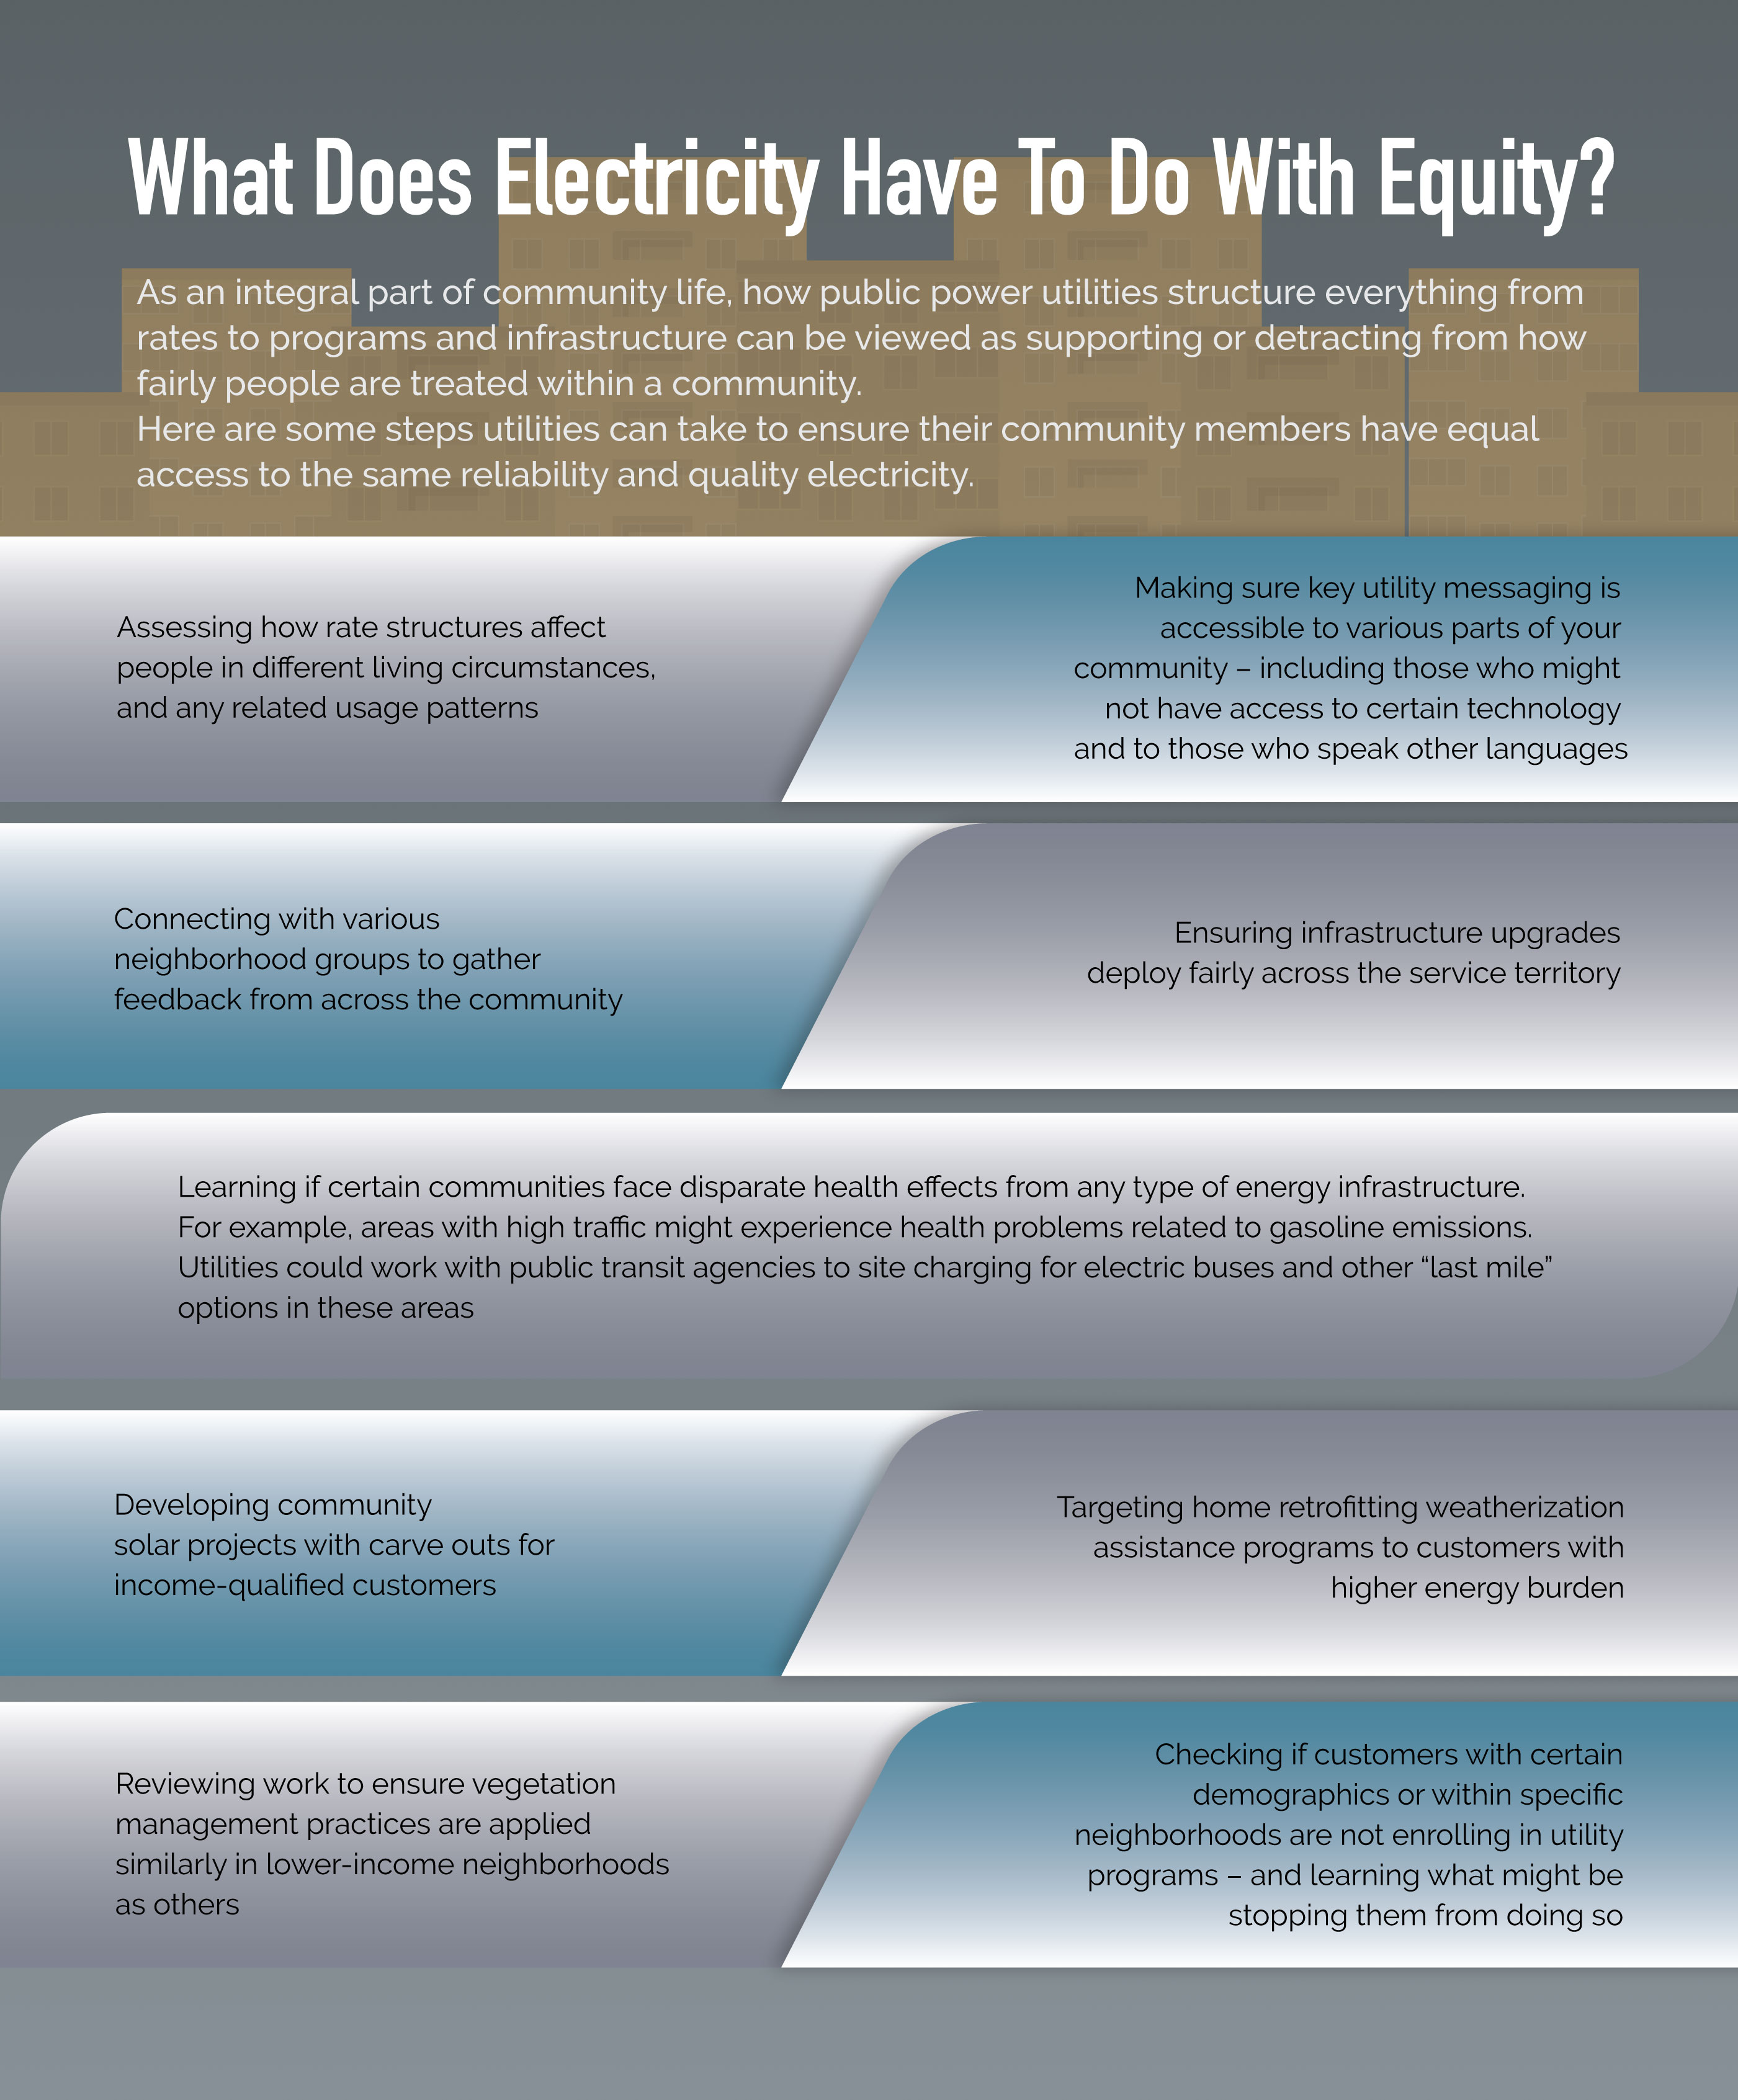 Steps utilities can take to consider equity